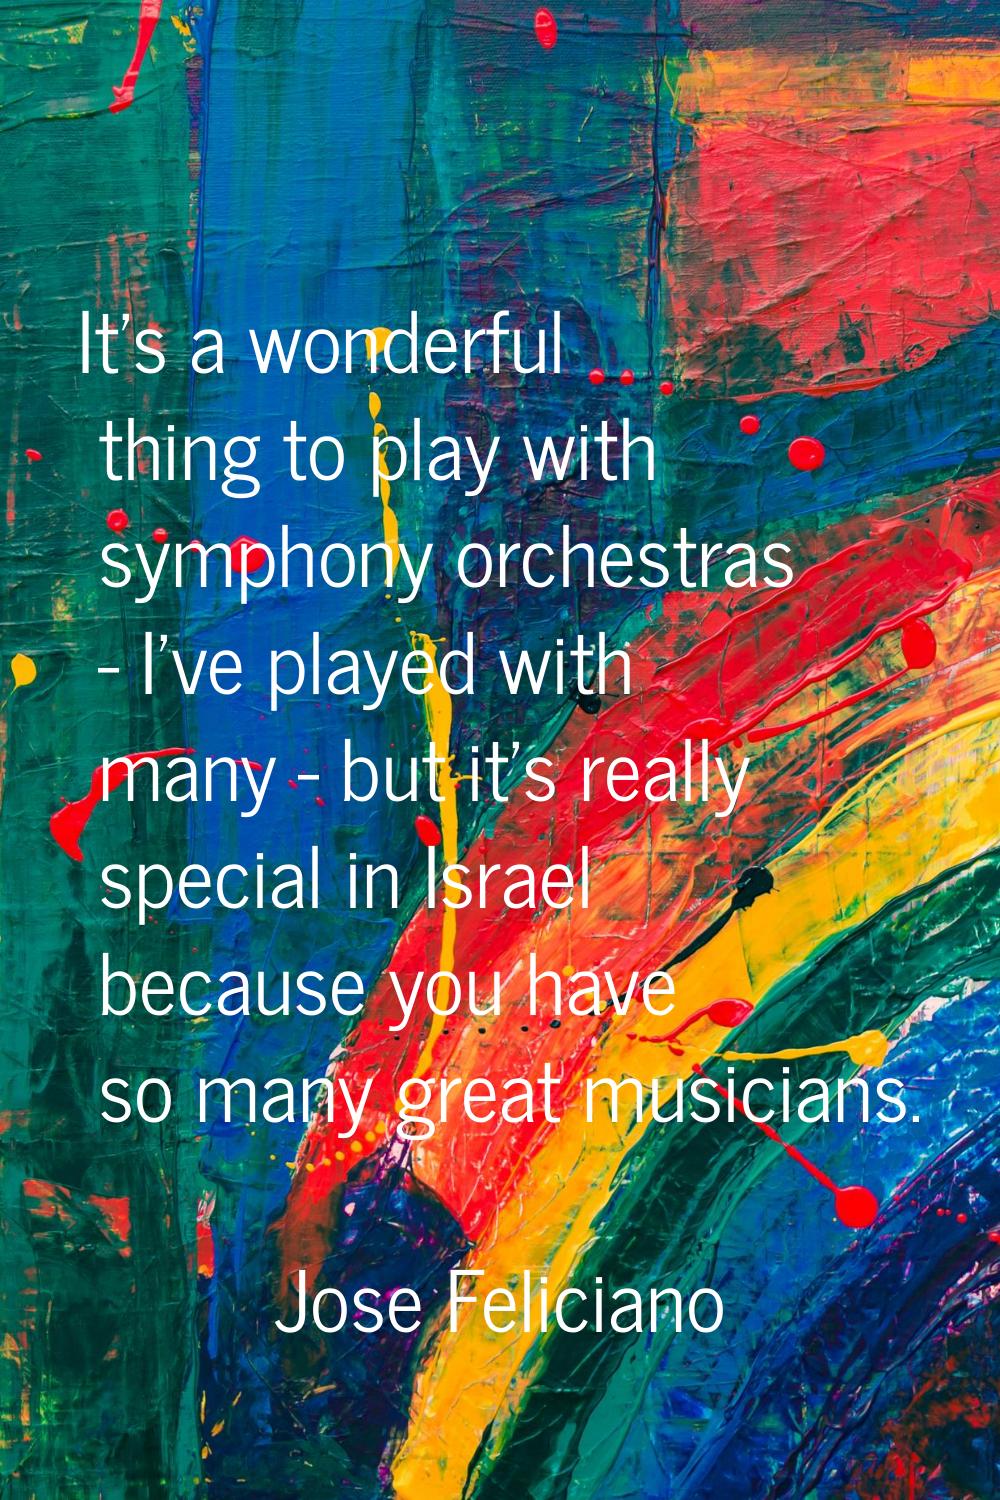 It's a wonderful thing to play with symphony orchestras - I've played with many - but it's really s